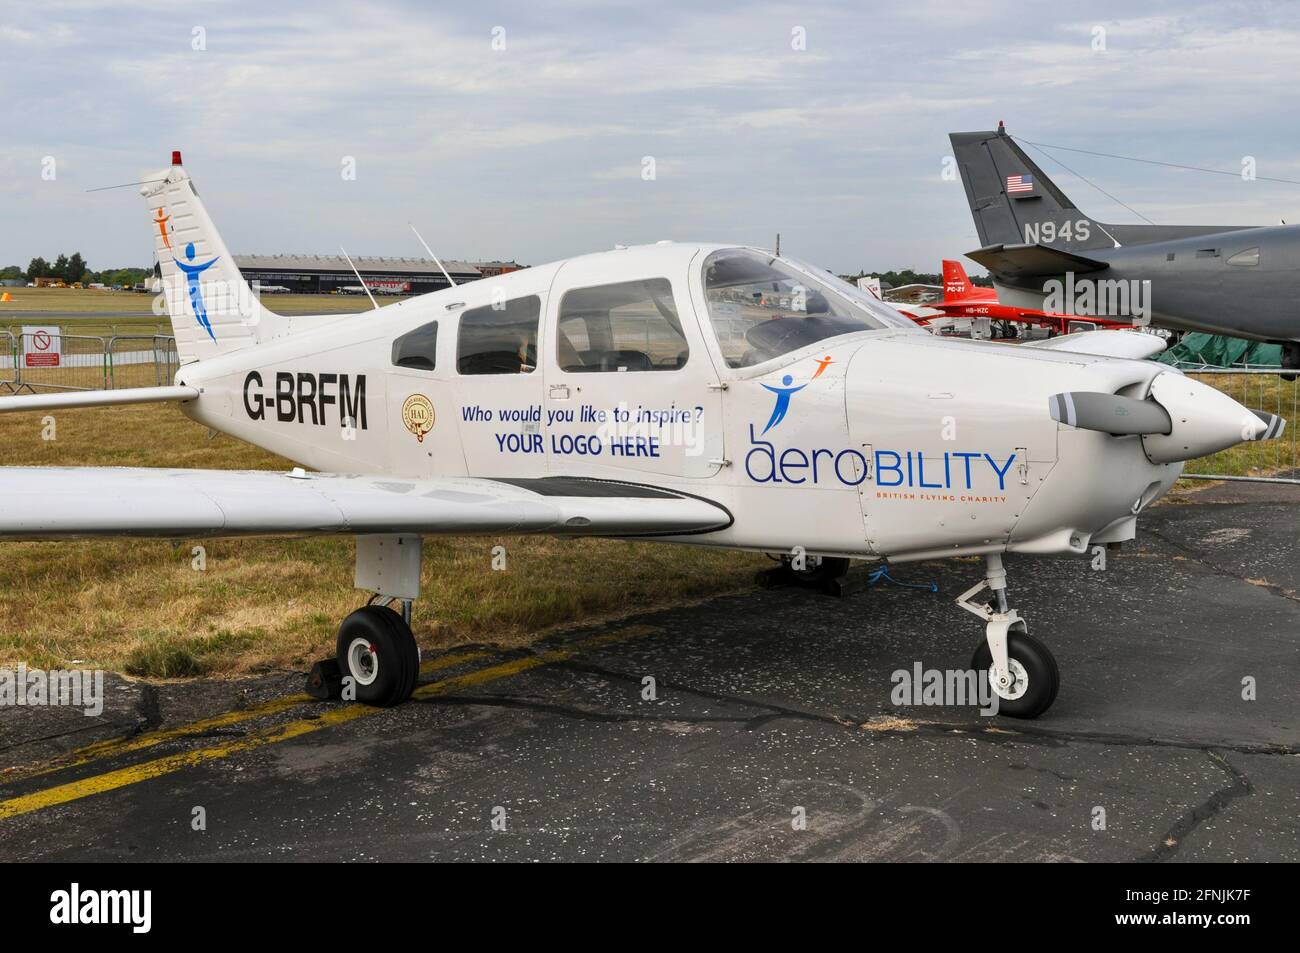 Aerobility Piper PA-28 G-BRFM on static display at Farnborough International Airshow 2010, UK. Air mobility charity Stock Photo